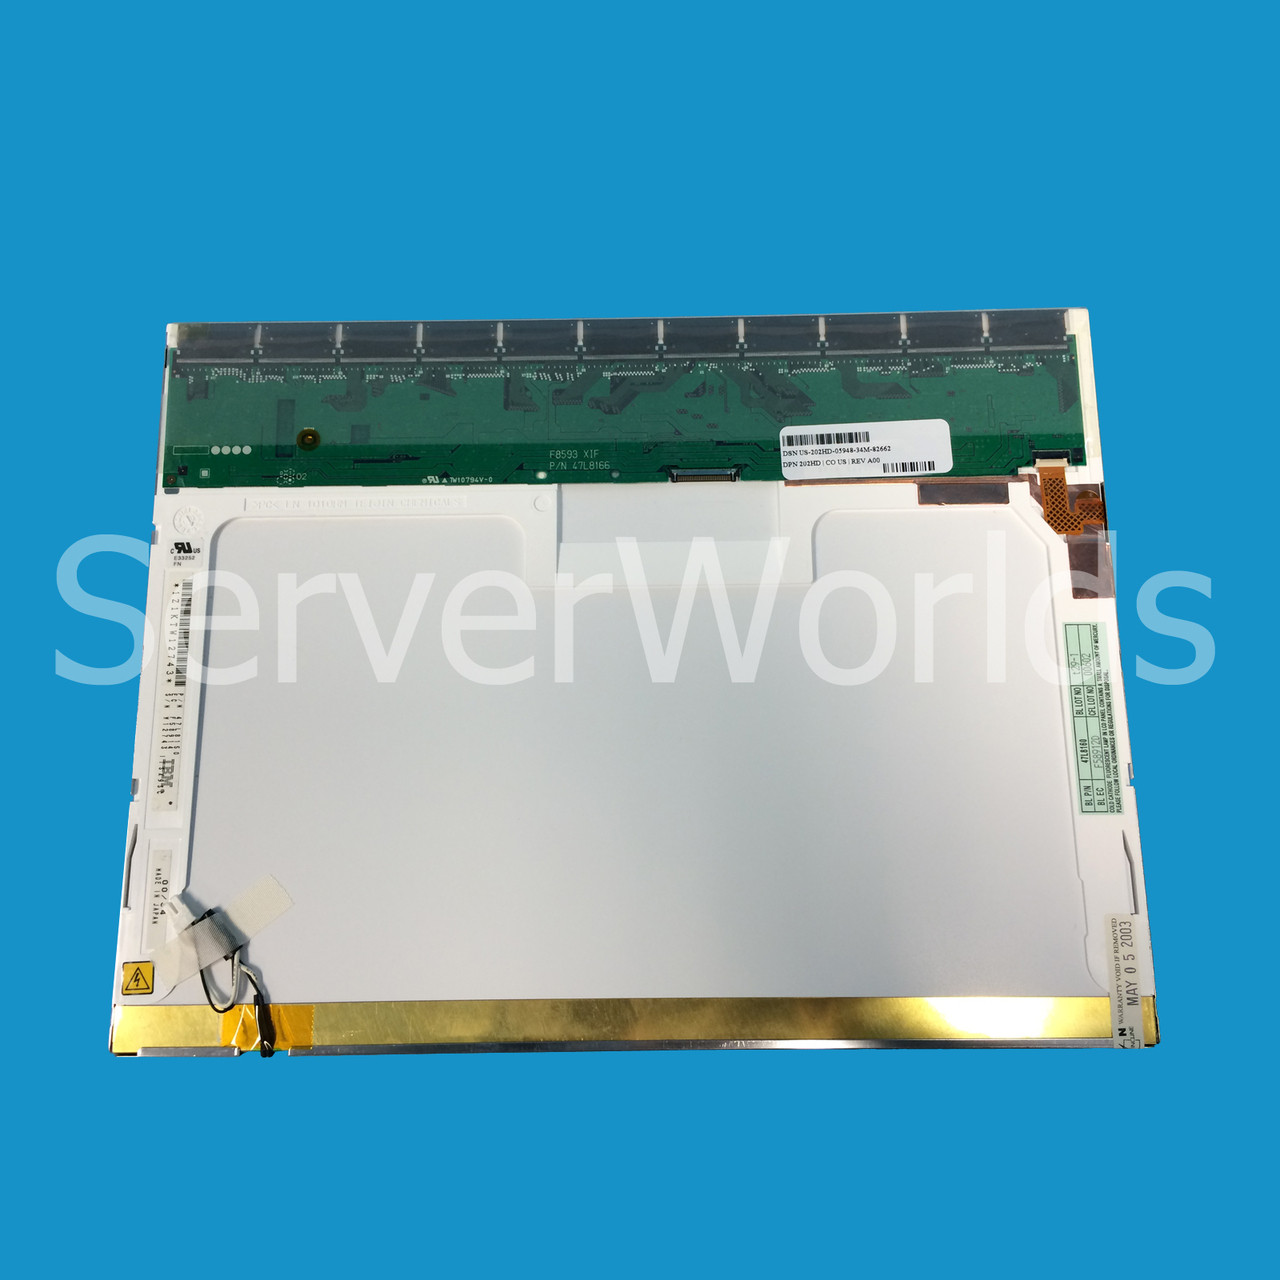 Dell 202HD Inspiron 7500 15.1 LCD Display